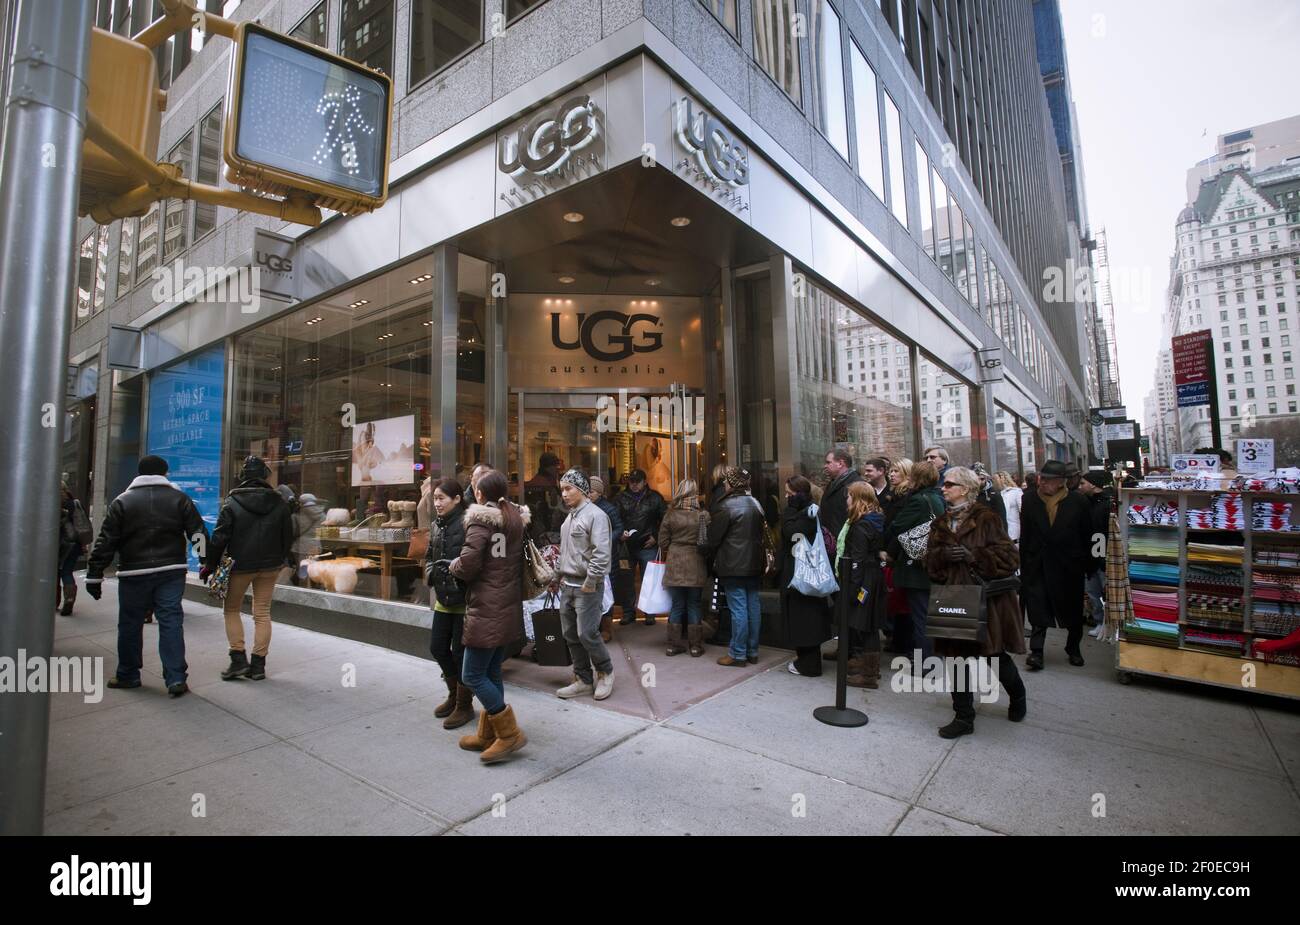 Shoppers patiently wait on line to enter the Ugg store on Madison Avenue in New  York on Sunday, December 19, 2010. Marcato Capital Management has exited  their 8.5 percent stake in Deckers